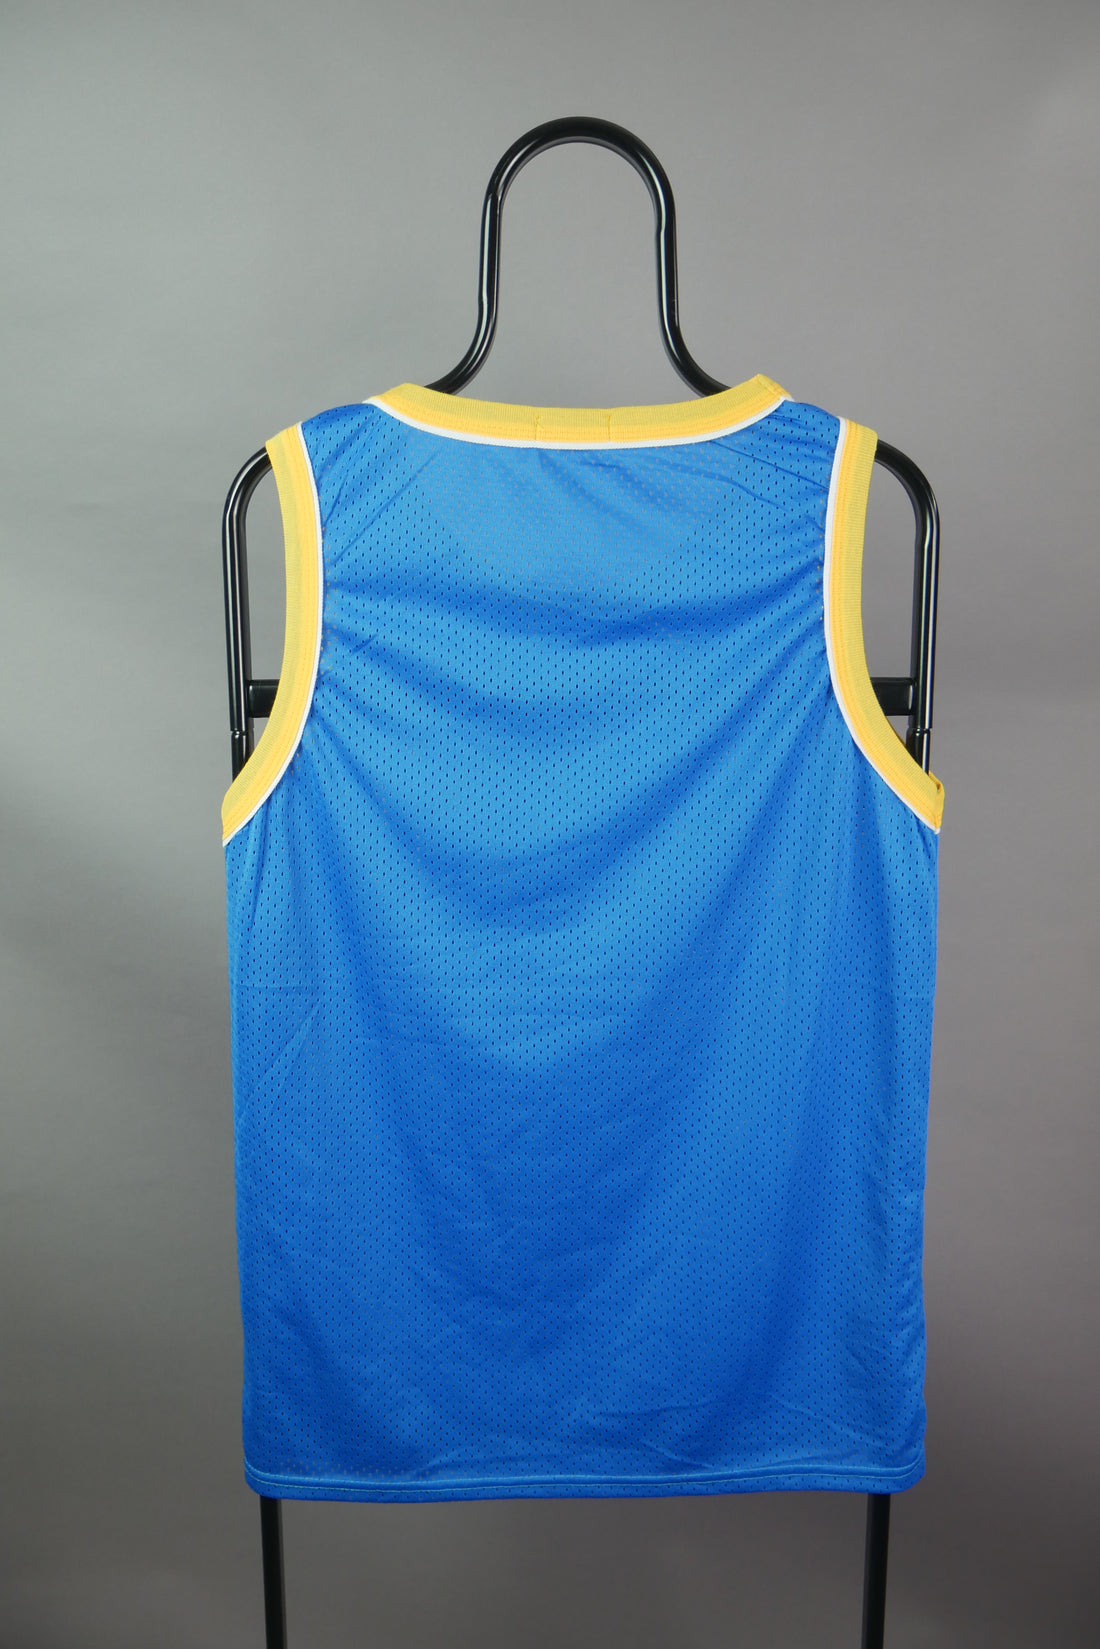 The Warriors Graphic Basketball Tank (L)